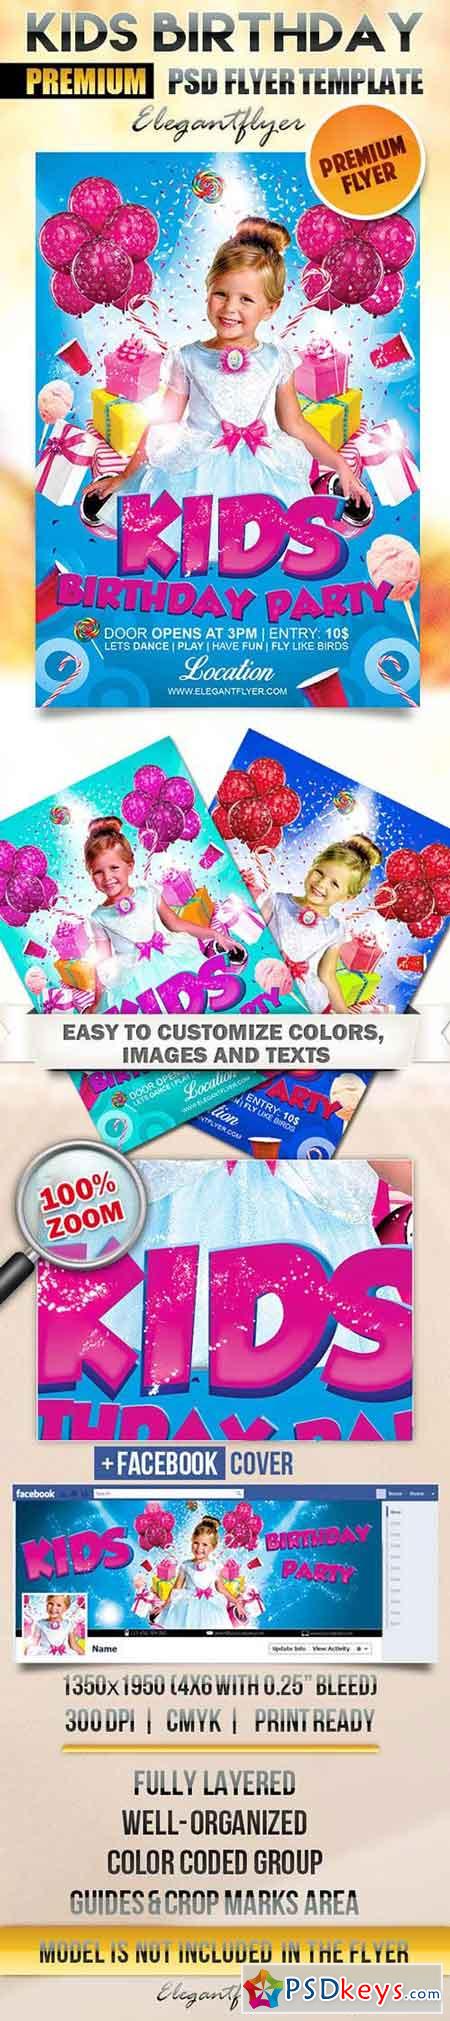 Kids Birthday Party Flyer PSD Template + Facebook Cover